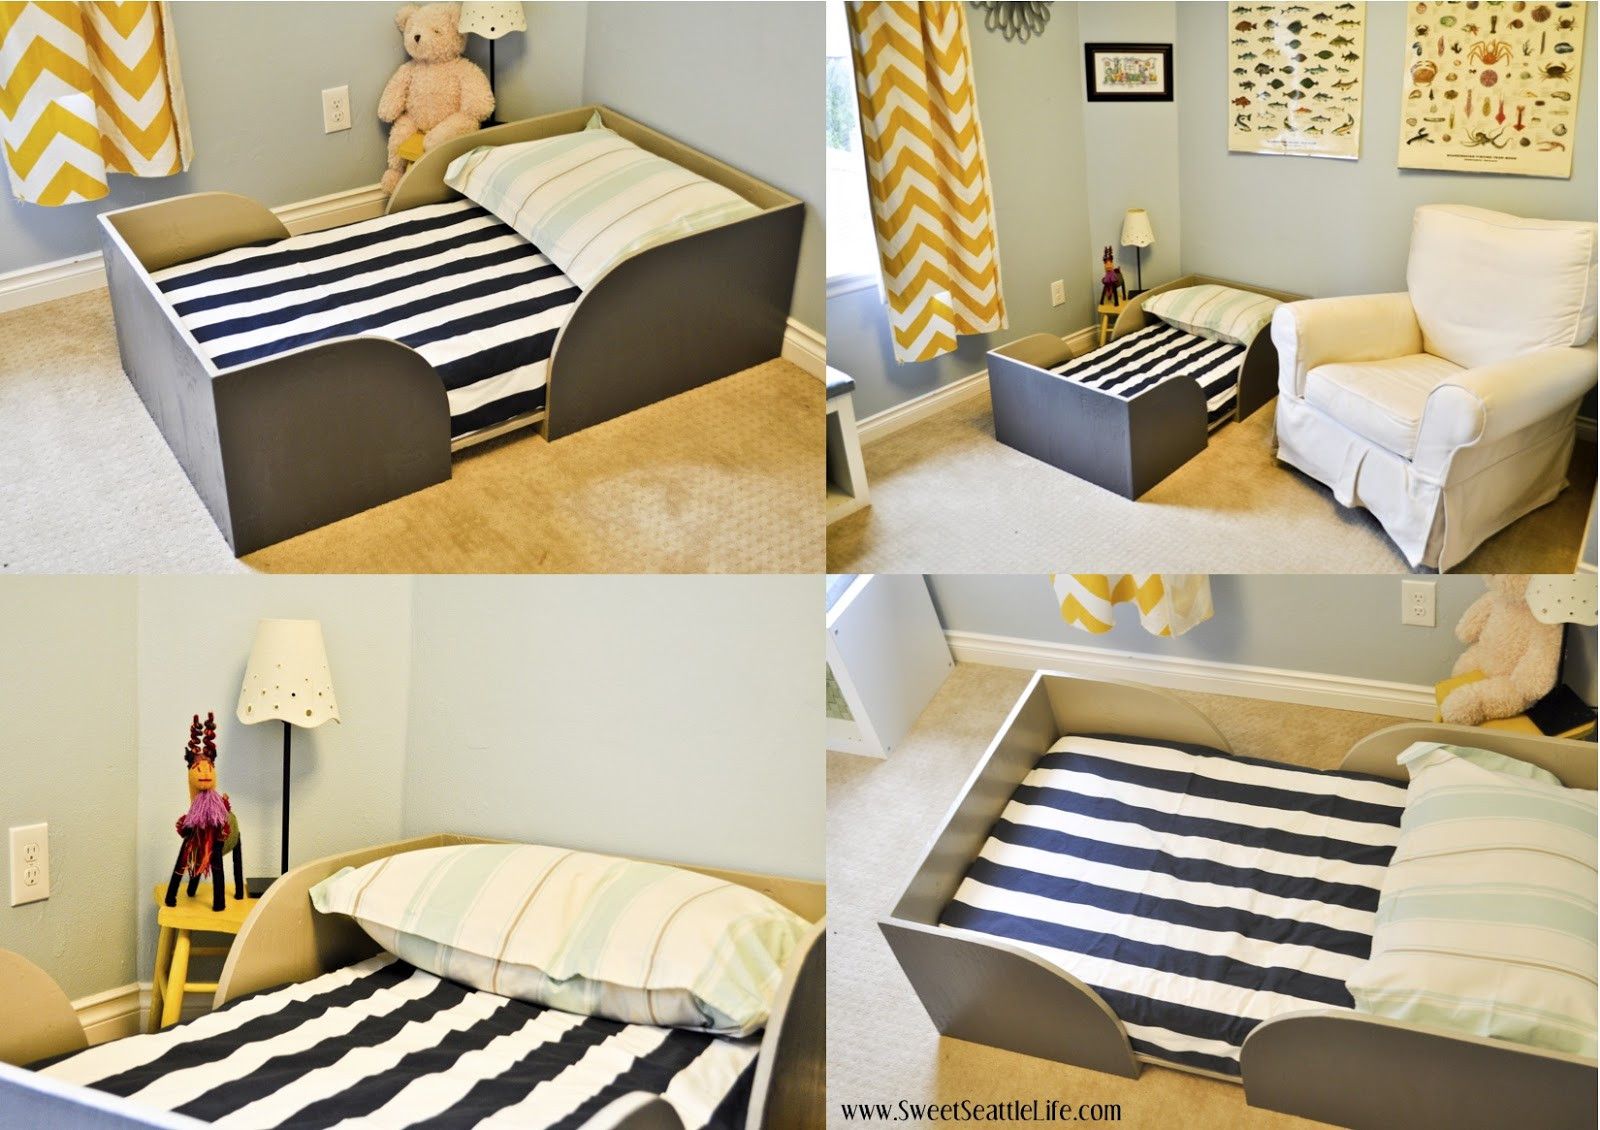 DIY Toddler Bed
 Chris and Sonja The Sweet Seattle Life DIY Toddler Bed